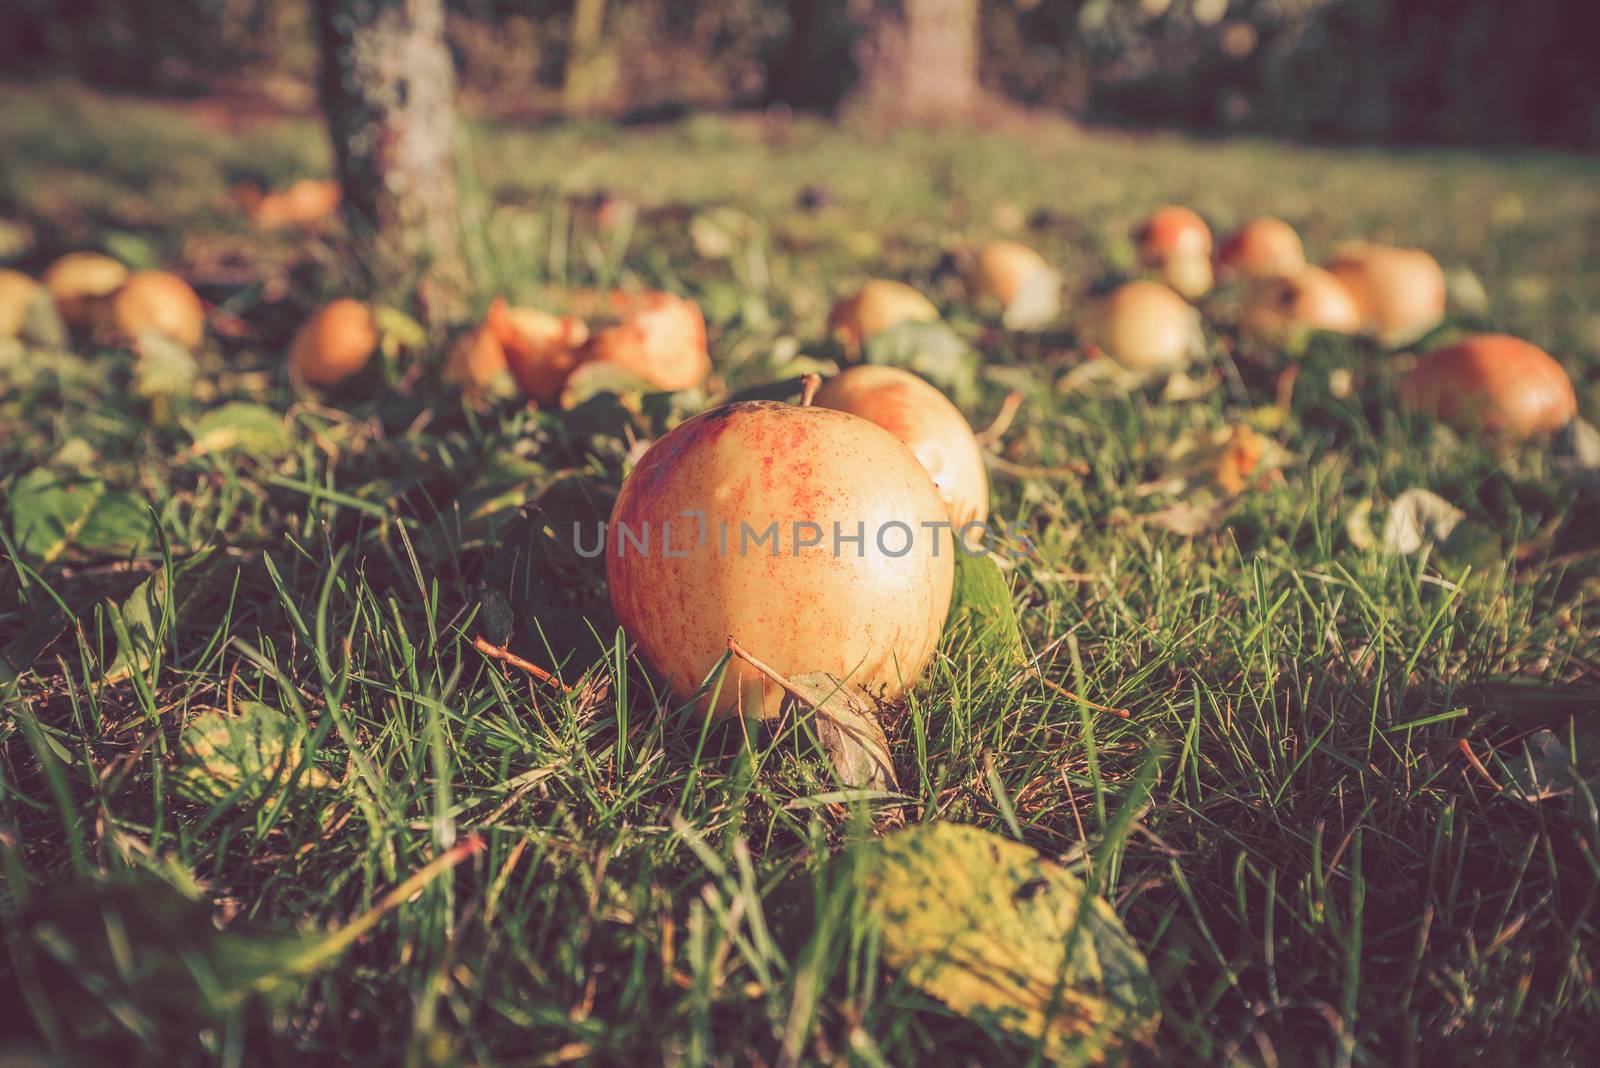 Autumn apples on the ground in autumn by Sportactive